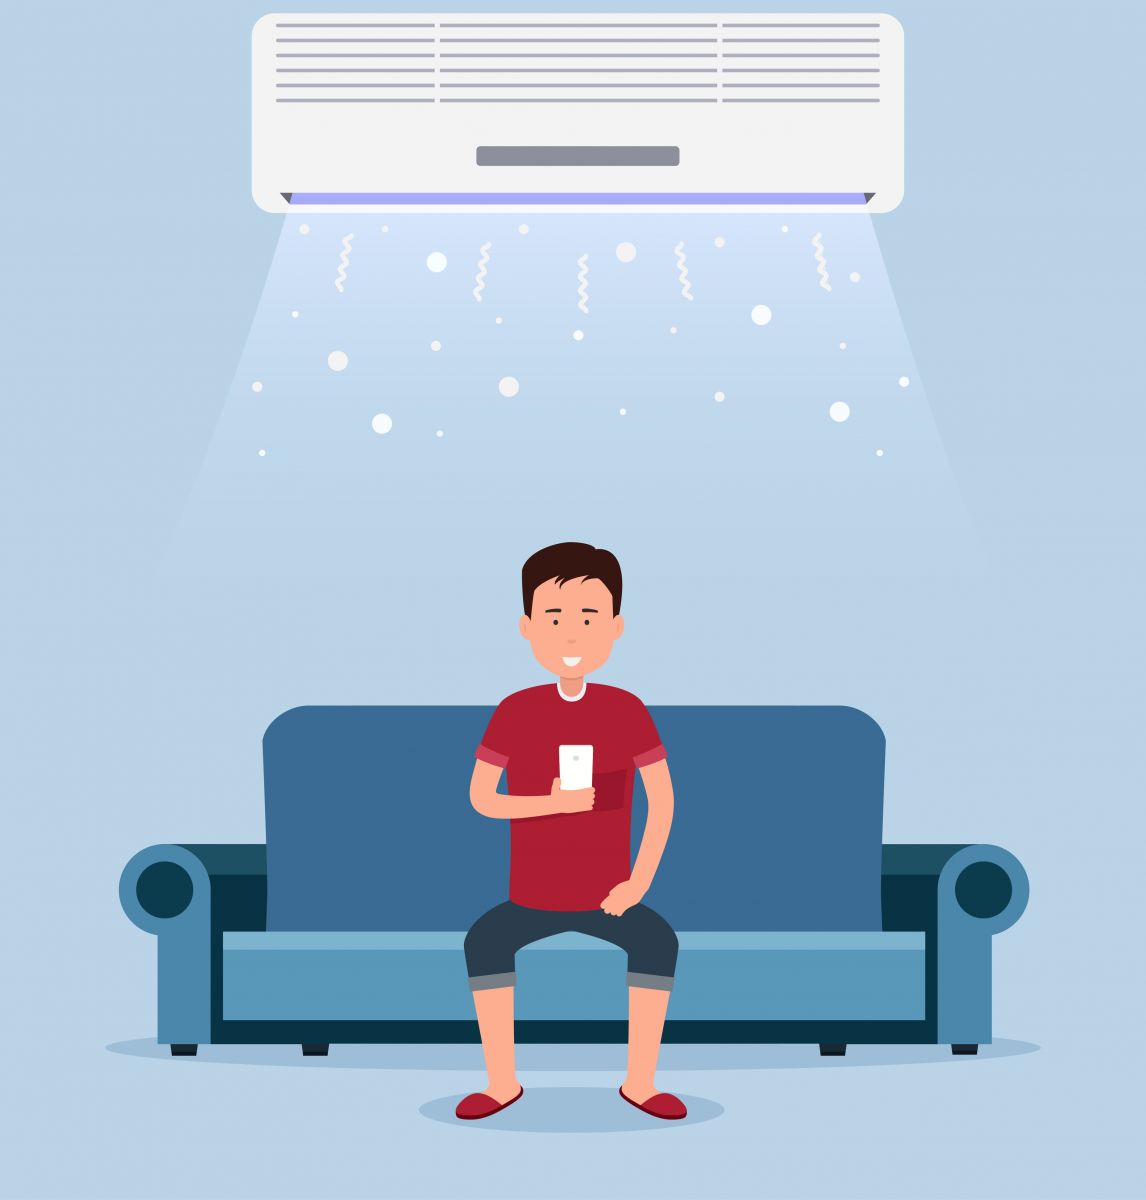 Man sitting on the couch enjoying the benefits of a ductless mini split system while on his phone